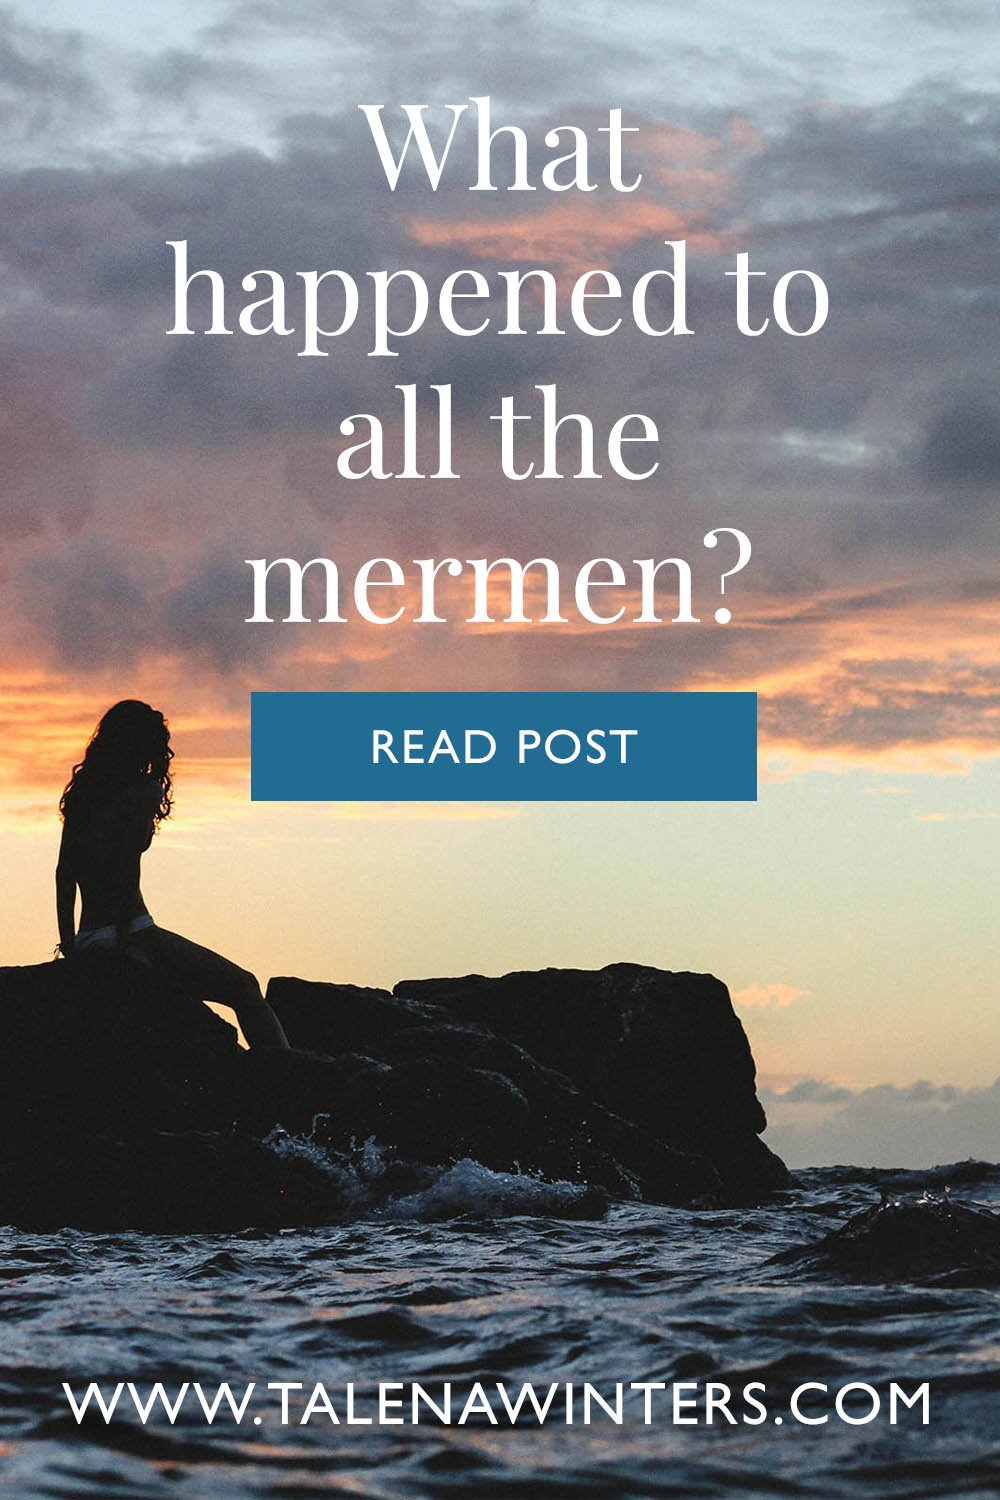 What happened to all the mermen?